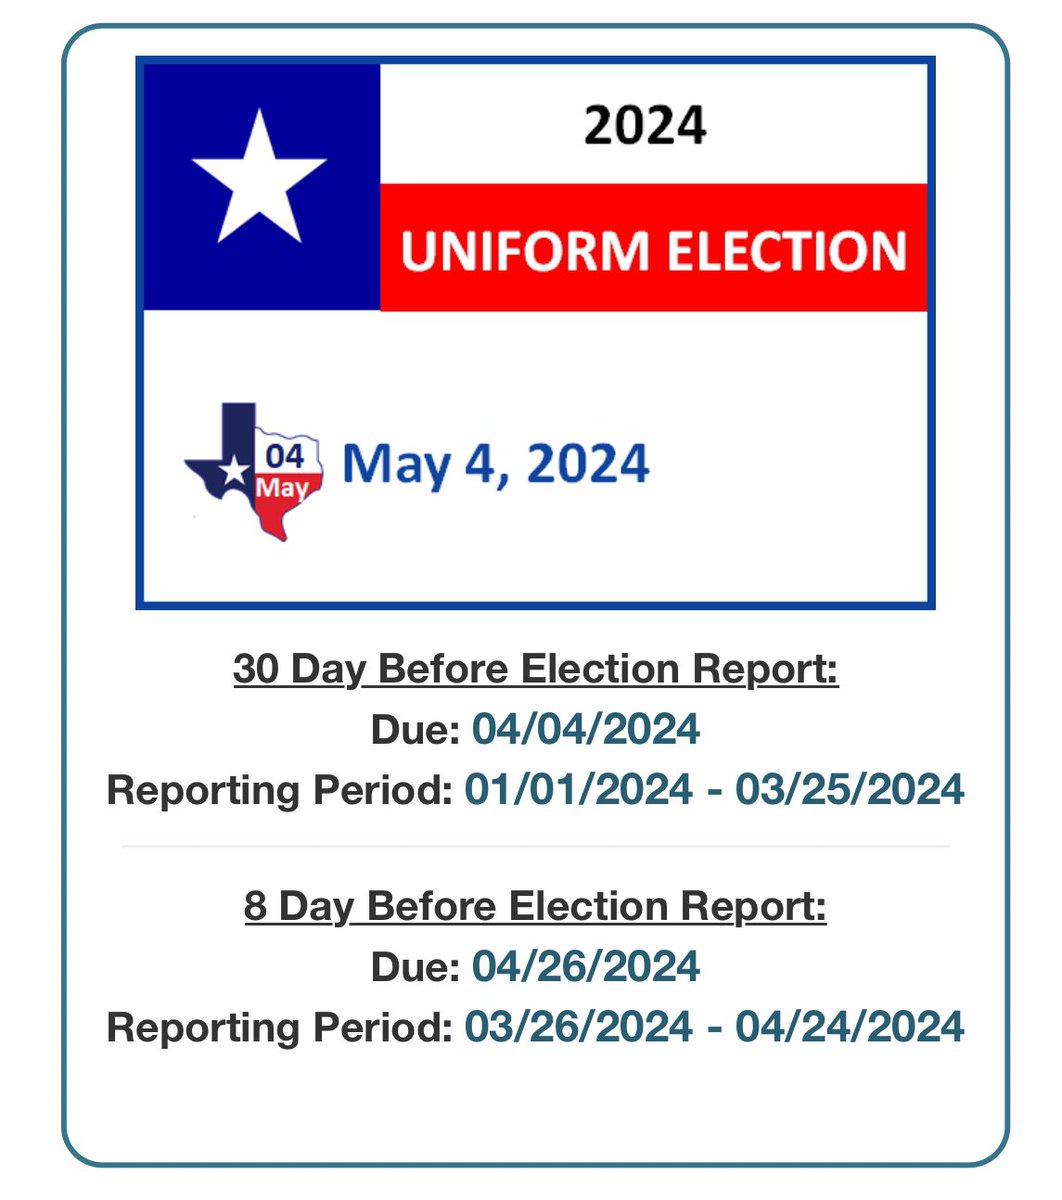 You create a PAC on 3/28 for the municipal elections in Texas to hide who is funding your PAC. For the Muni’s, the 30 day before reports cover 1/1 - 3/25. By waiting until 3/28, the money is hidden until 4/26, just 8 days before the election, leaving no time to inform people.